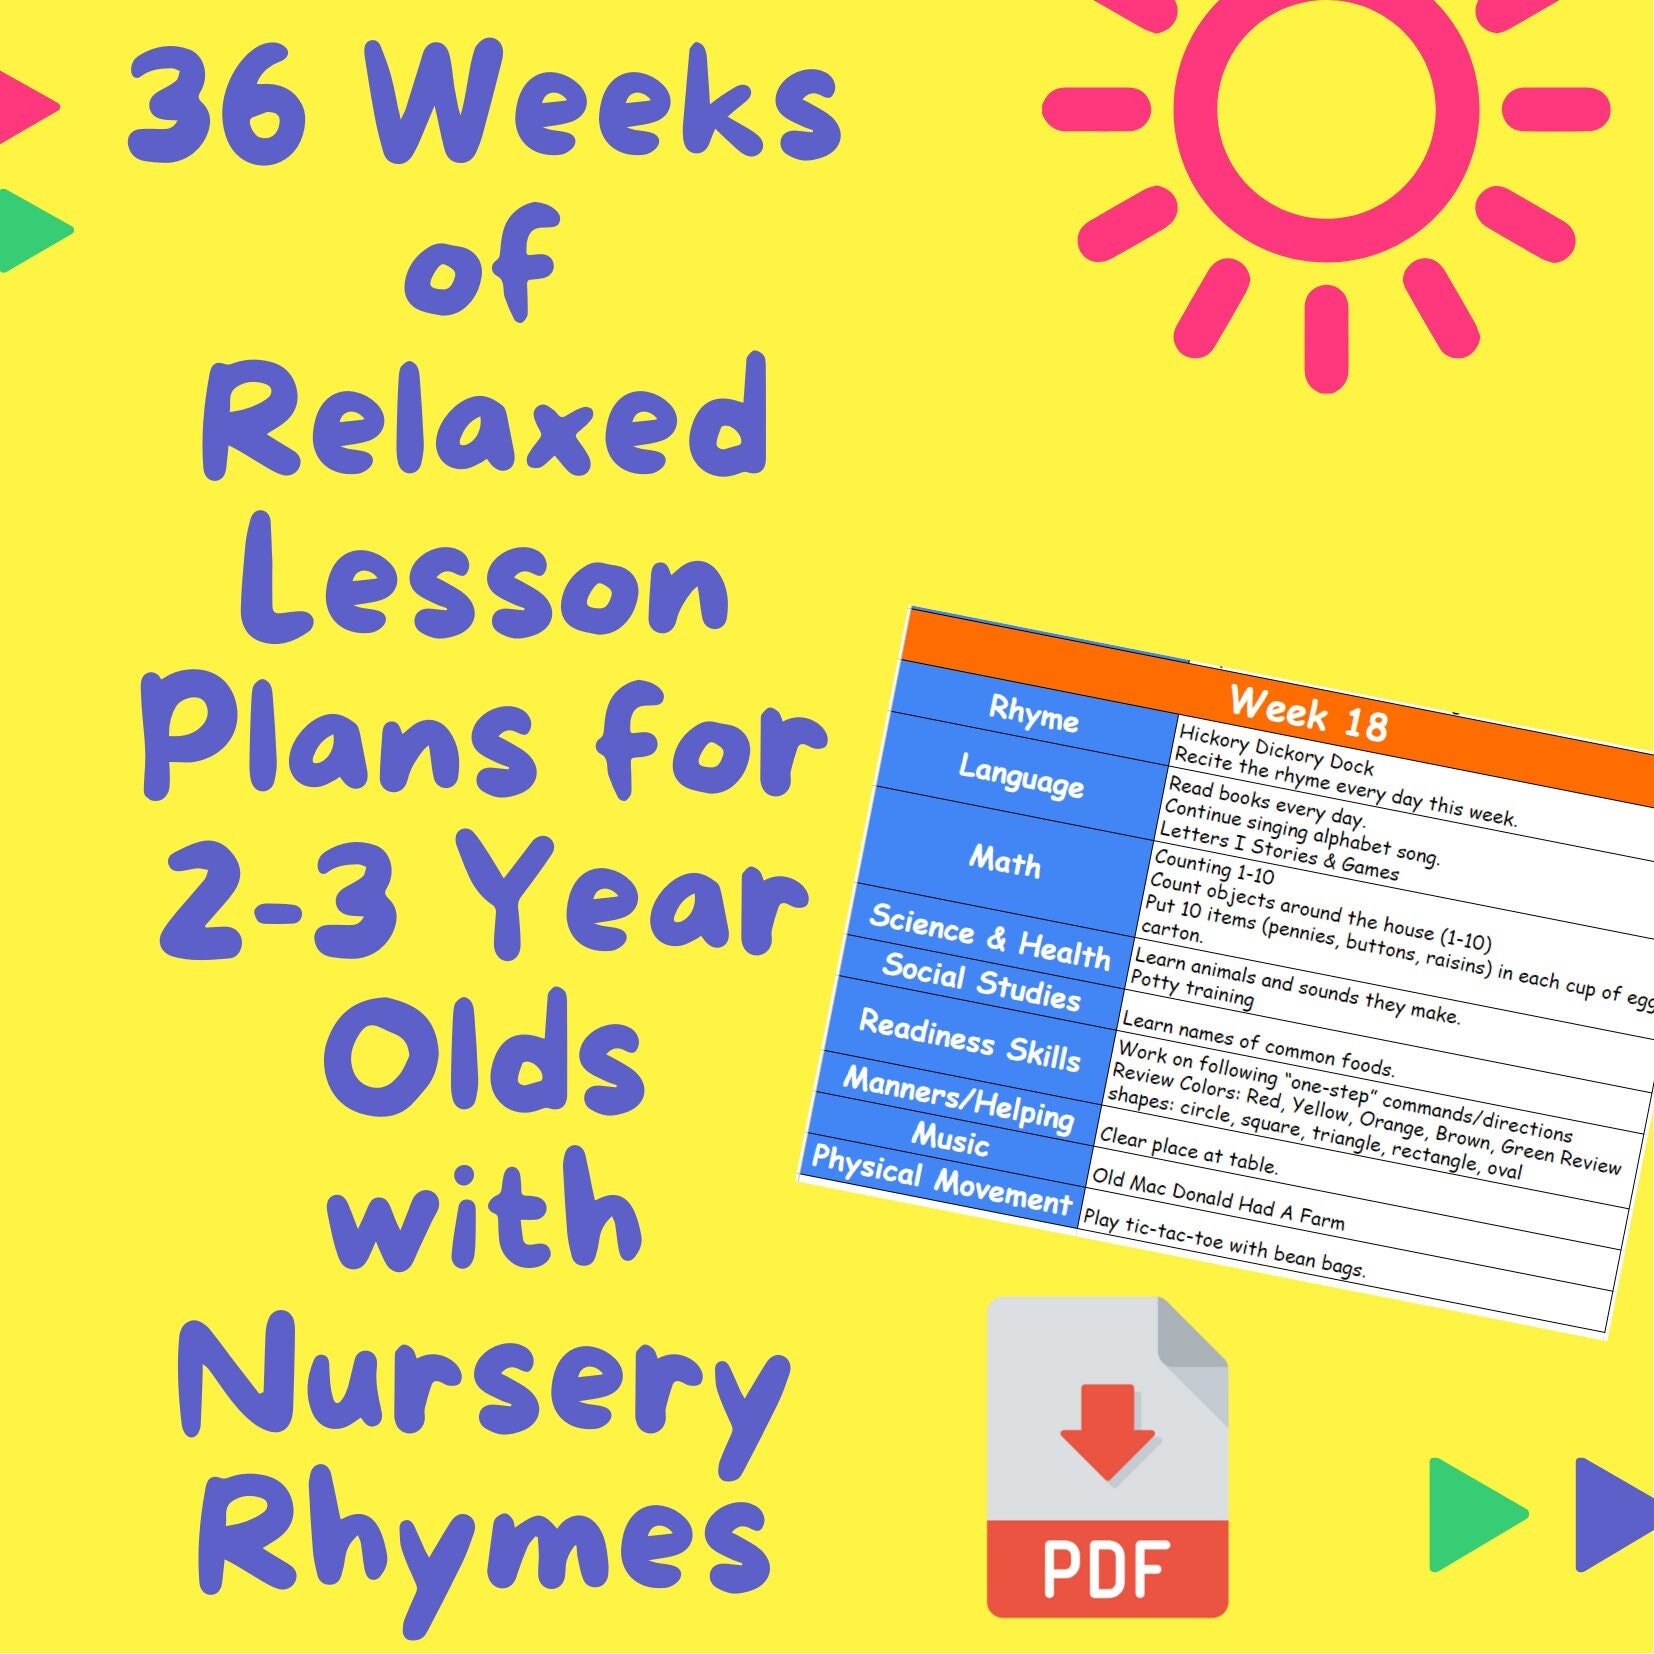 36 Weeks of Relaxed Weekly Lessons Plans With Nursery Rhymes -  Finland